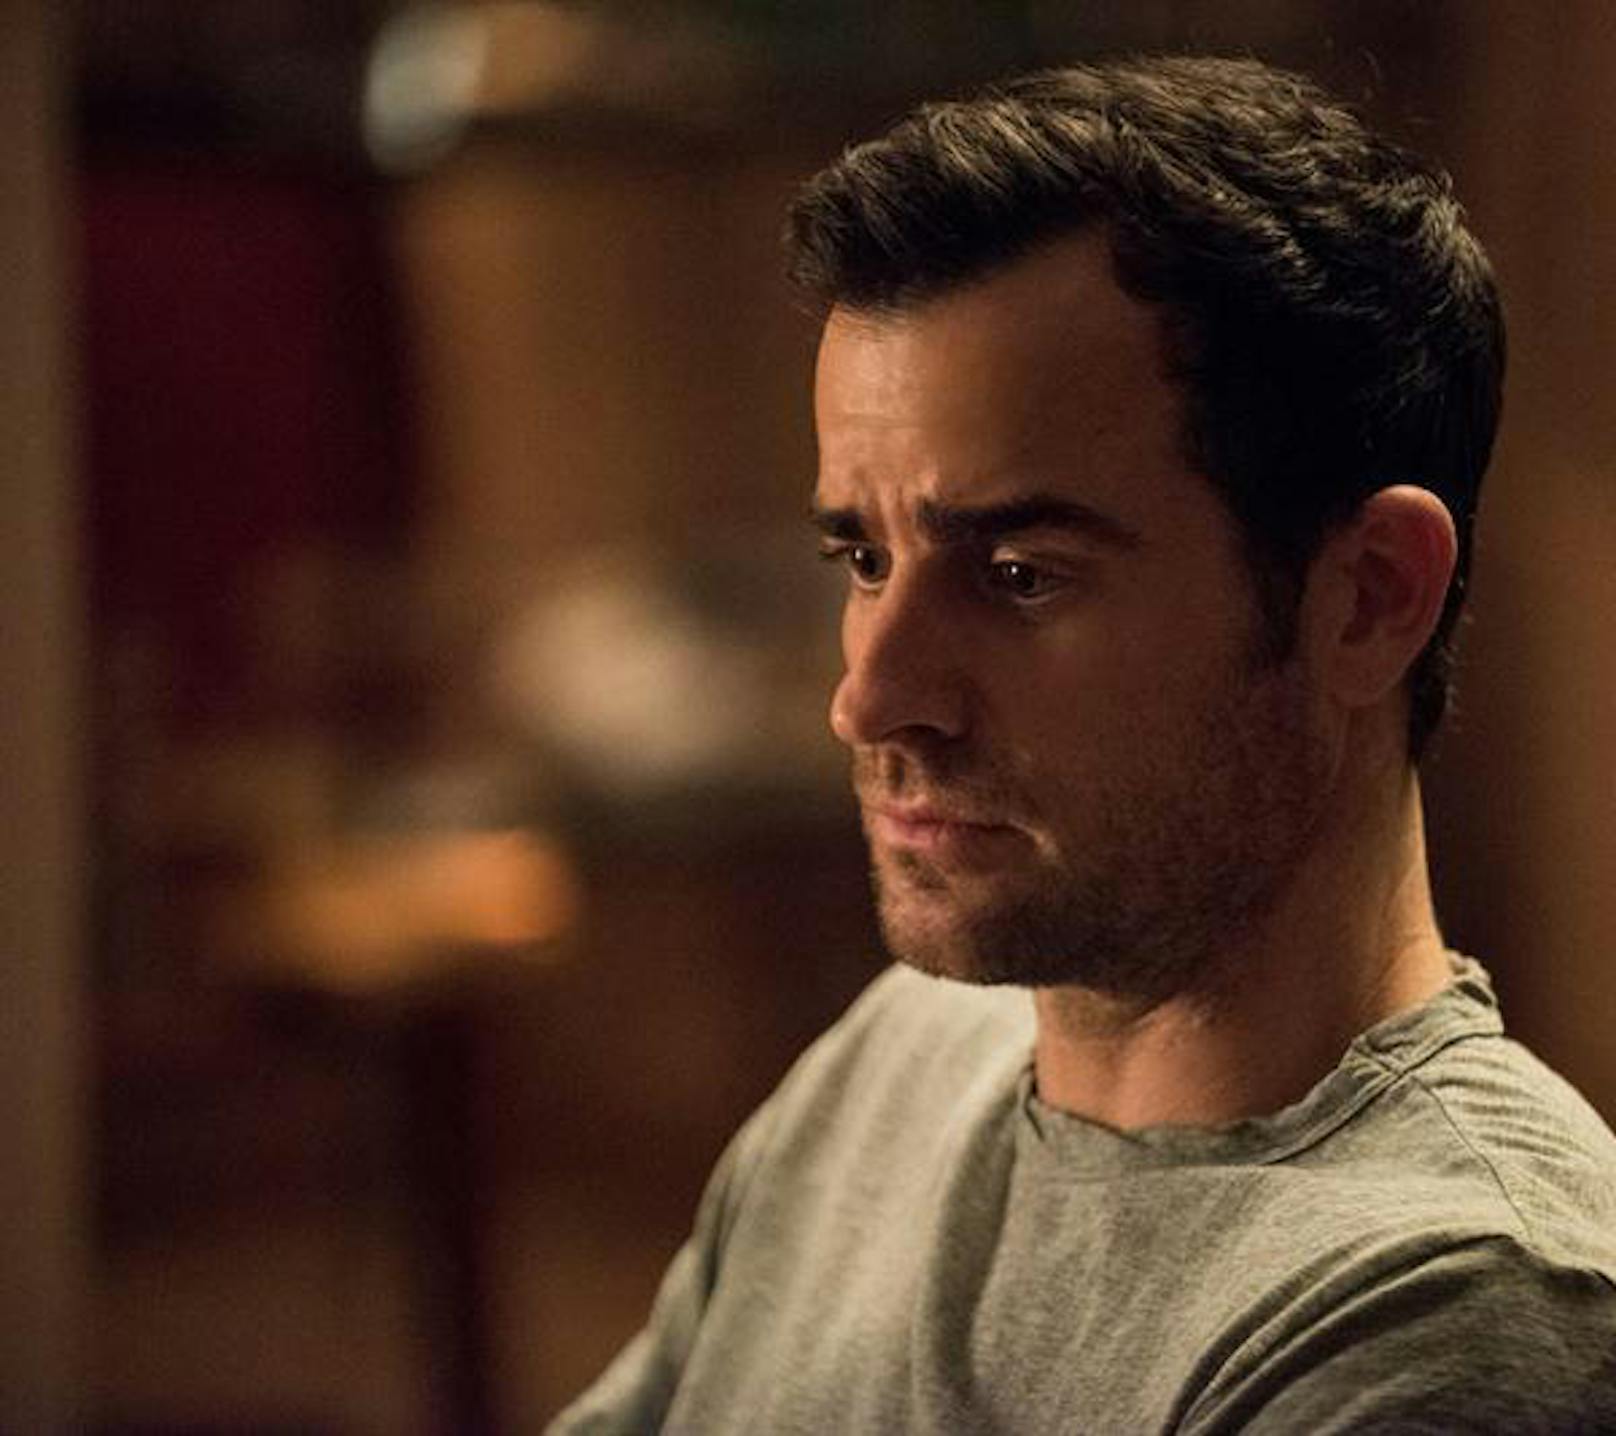 Justin Theroux in "The Leftovers"